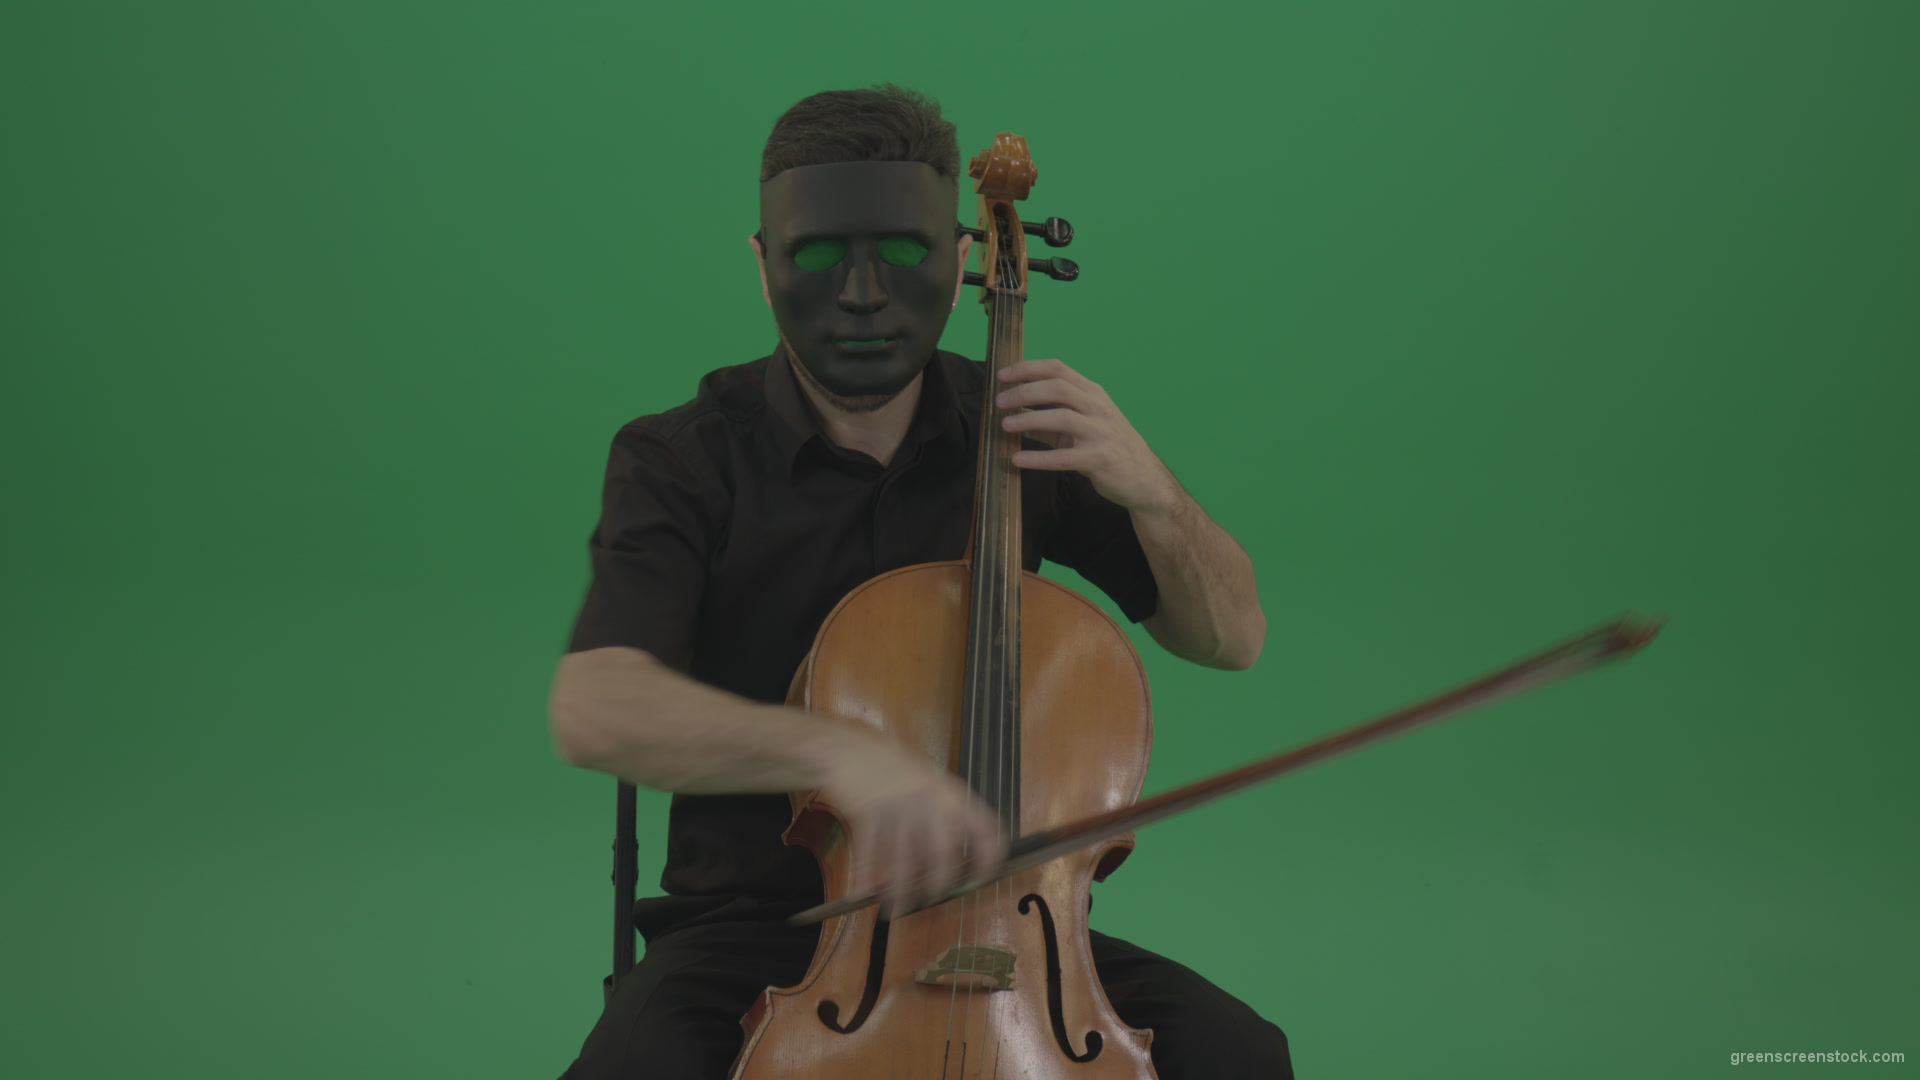 Gothic-Man-in-black-mask-playing-violoncello-cello-strings-music-instrument-isolated-on-green-screen_004 Green Screen Stock